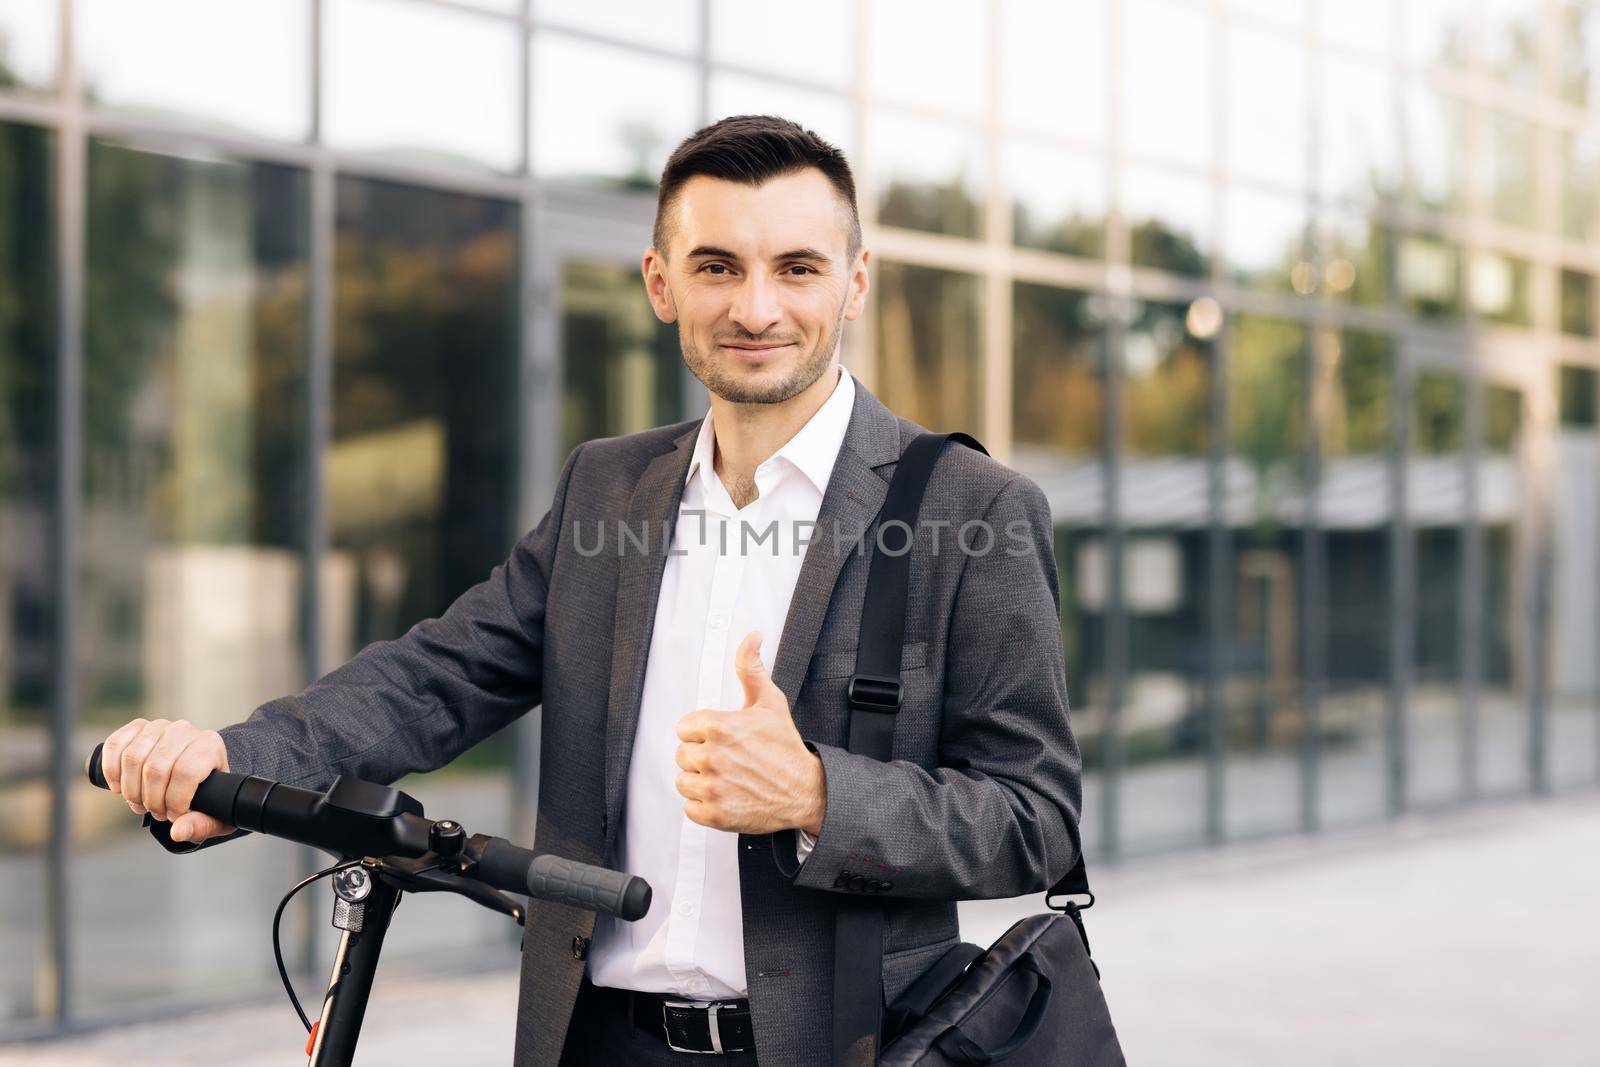 Handsome businessman with his electric scooter in front the business building. Young businessman in elegant suit standing outdoors, cheerfully smiling and showing thumb up.